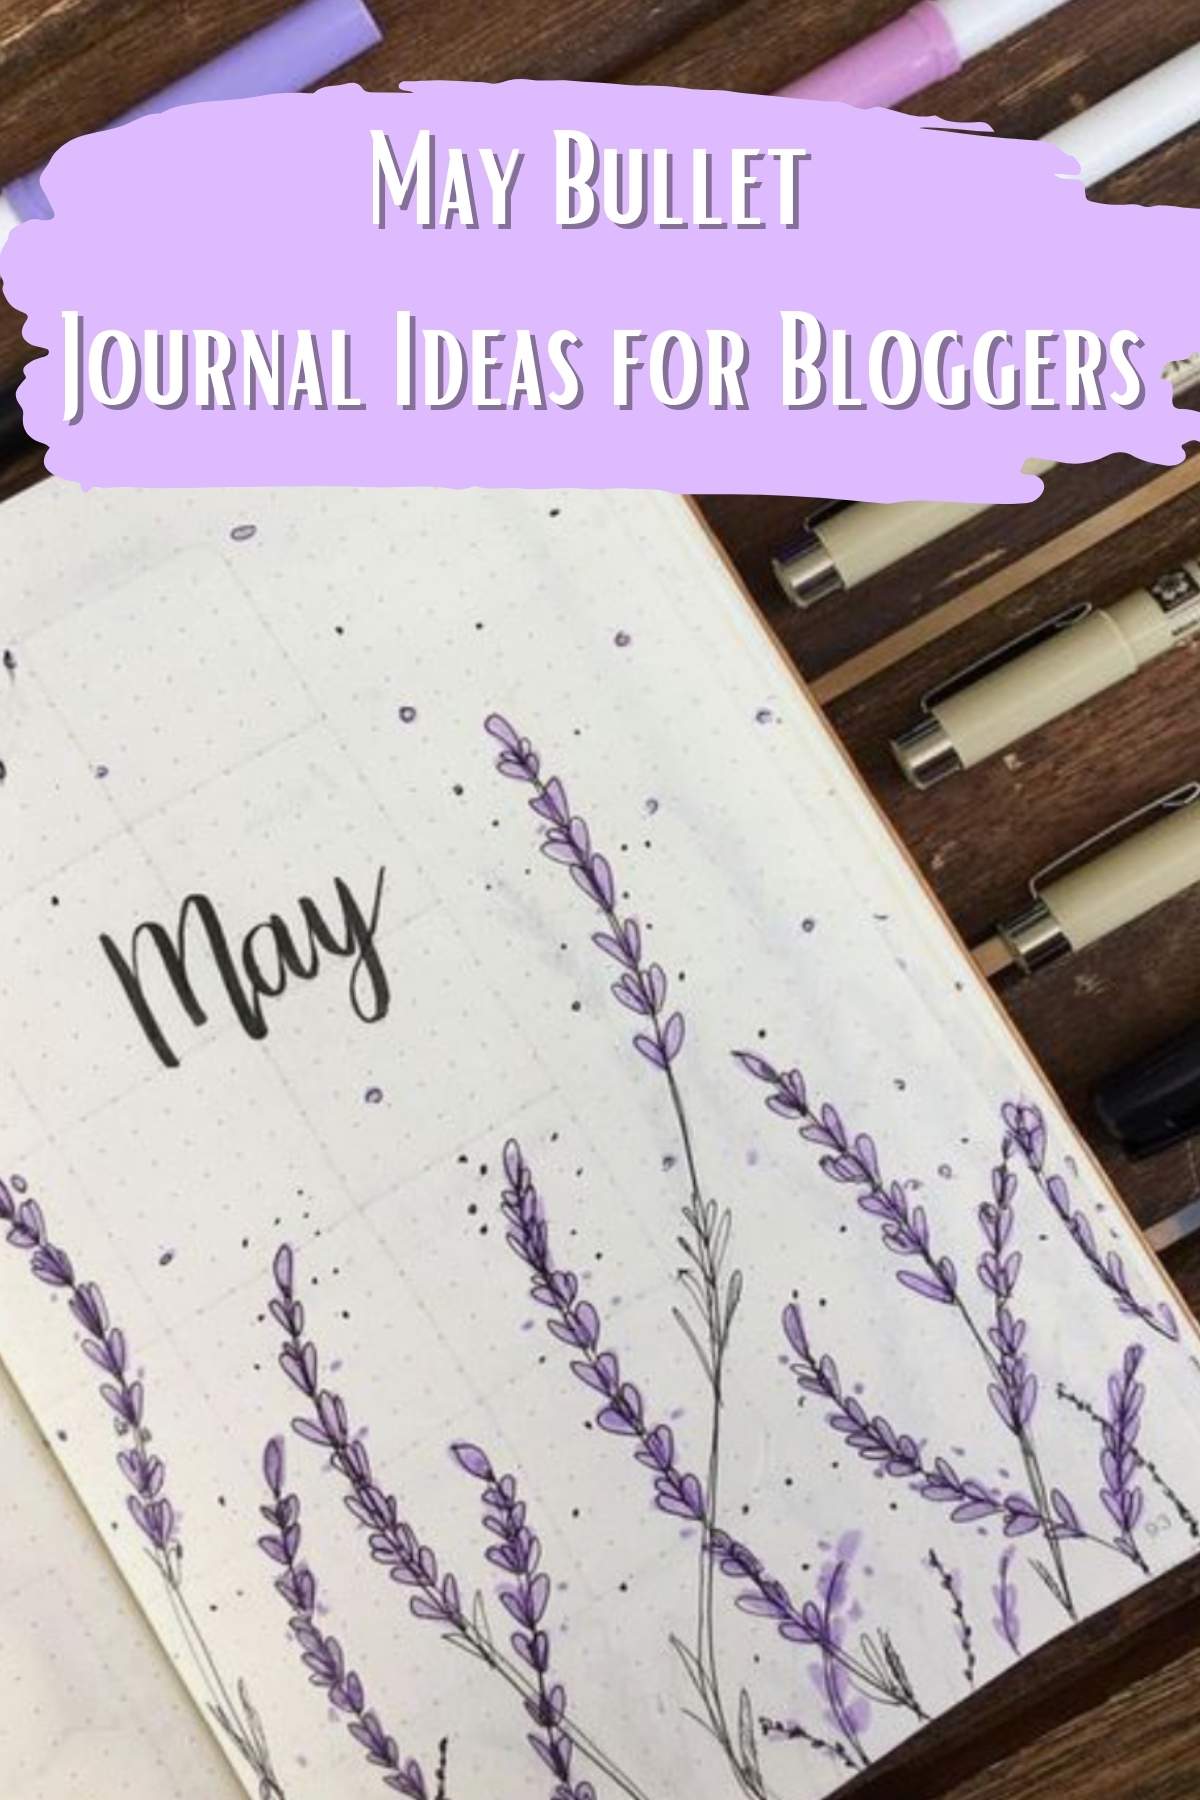 May Bullet Journal Idea for Bloggers. May cover with lavender.